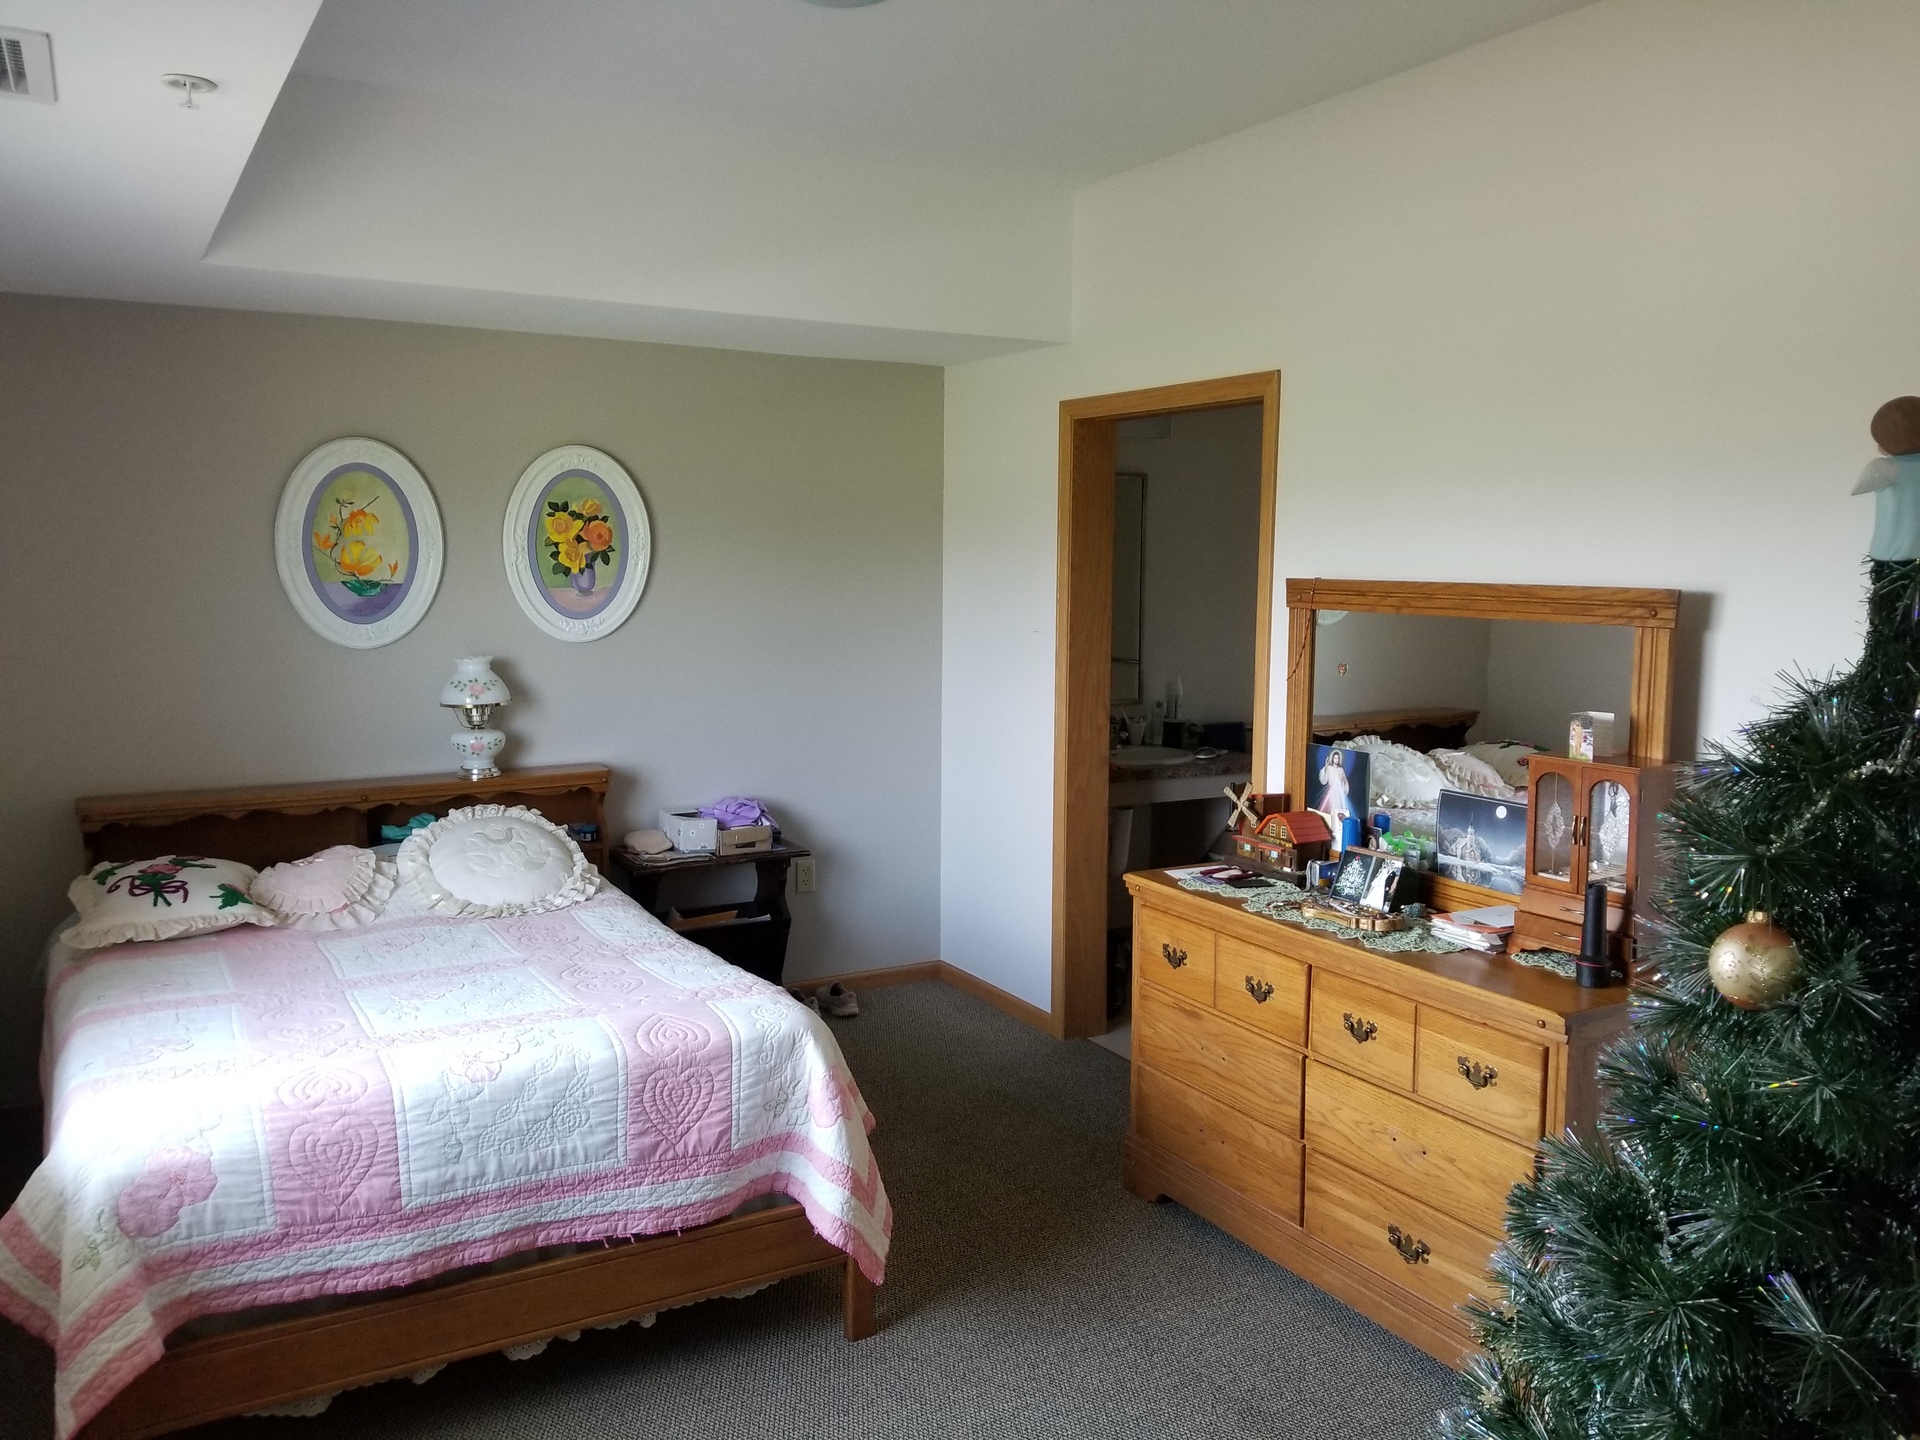 Furnished Asssisted Living Studio Apartment in Red Cloud NE